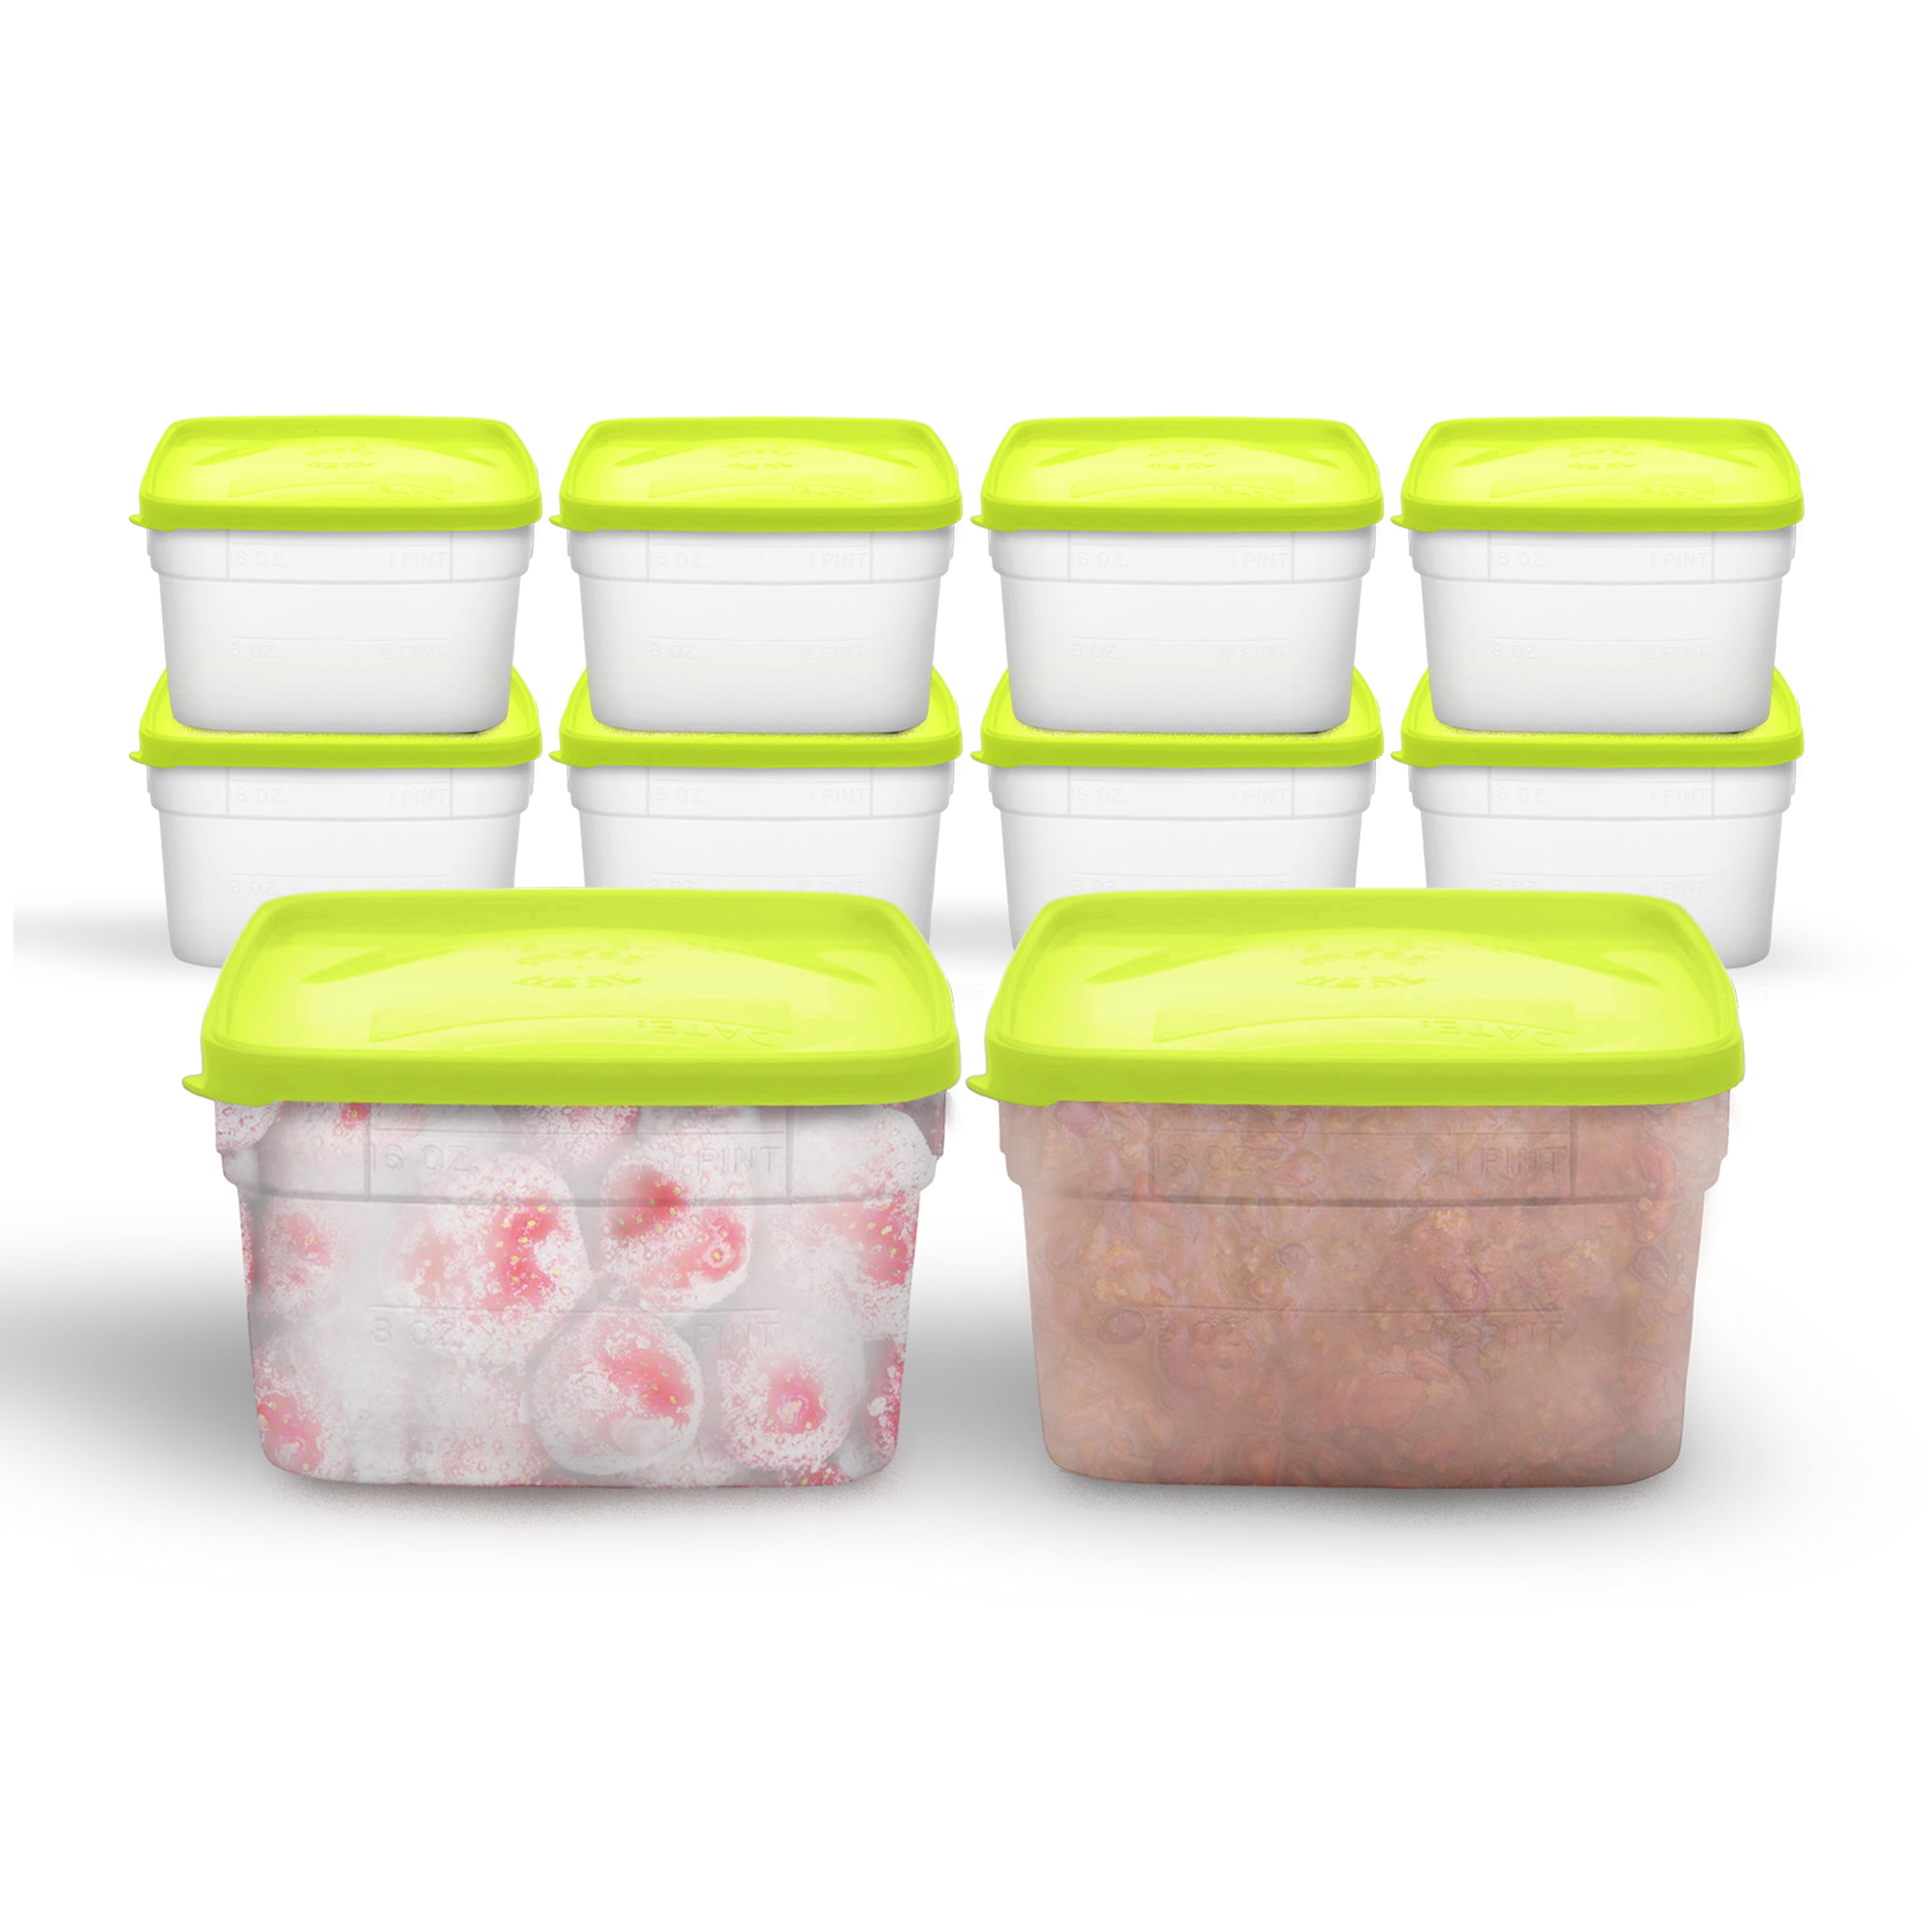 Glad 3-Pack Quart Plastic Bpa-free Reusable Food Storage Container with Lid  in the Food Storage Containers department at